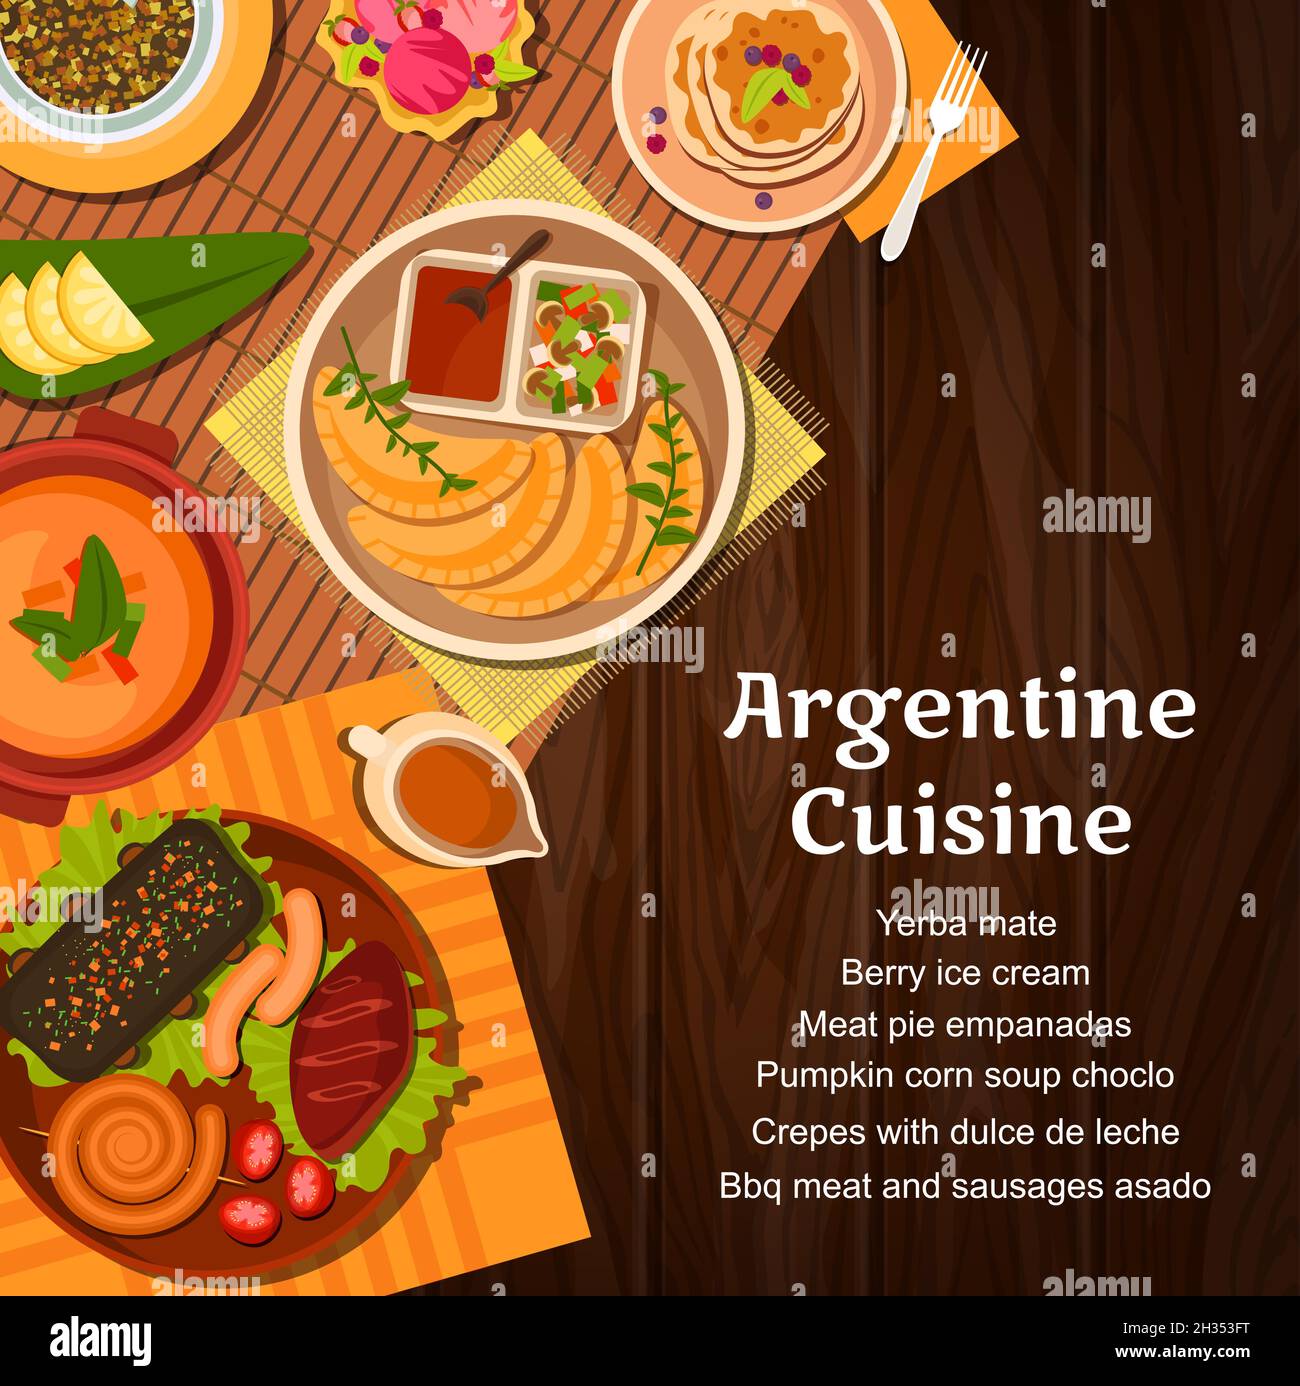 Argentine cuisine menu cover with vector meat, vegetable and dessert dishes. Barbecue asado pork and chorizo sausages, empanada pies and corn soup, ye Stock Vector